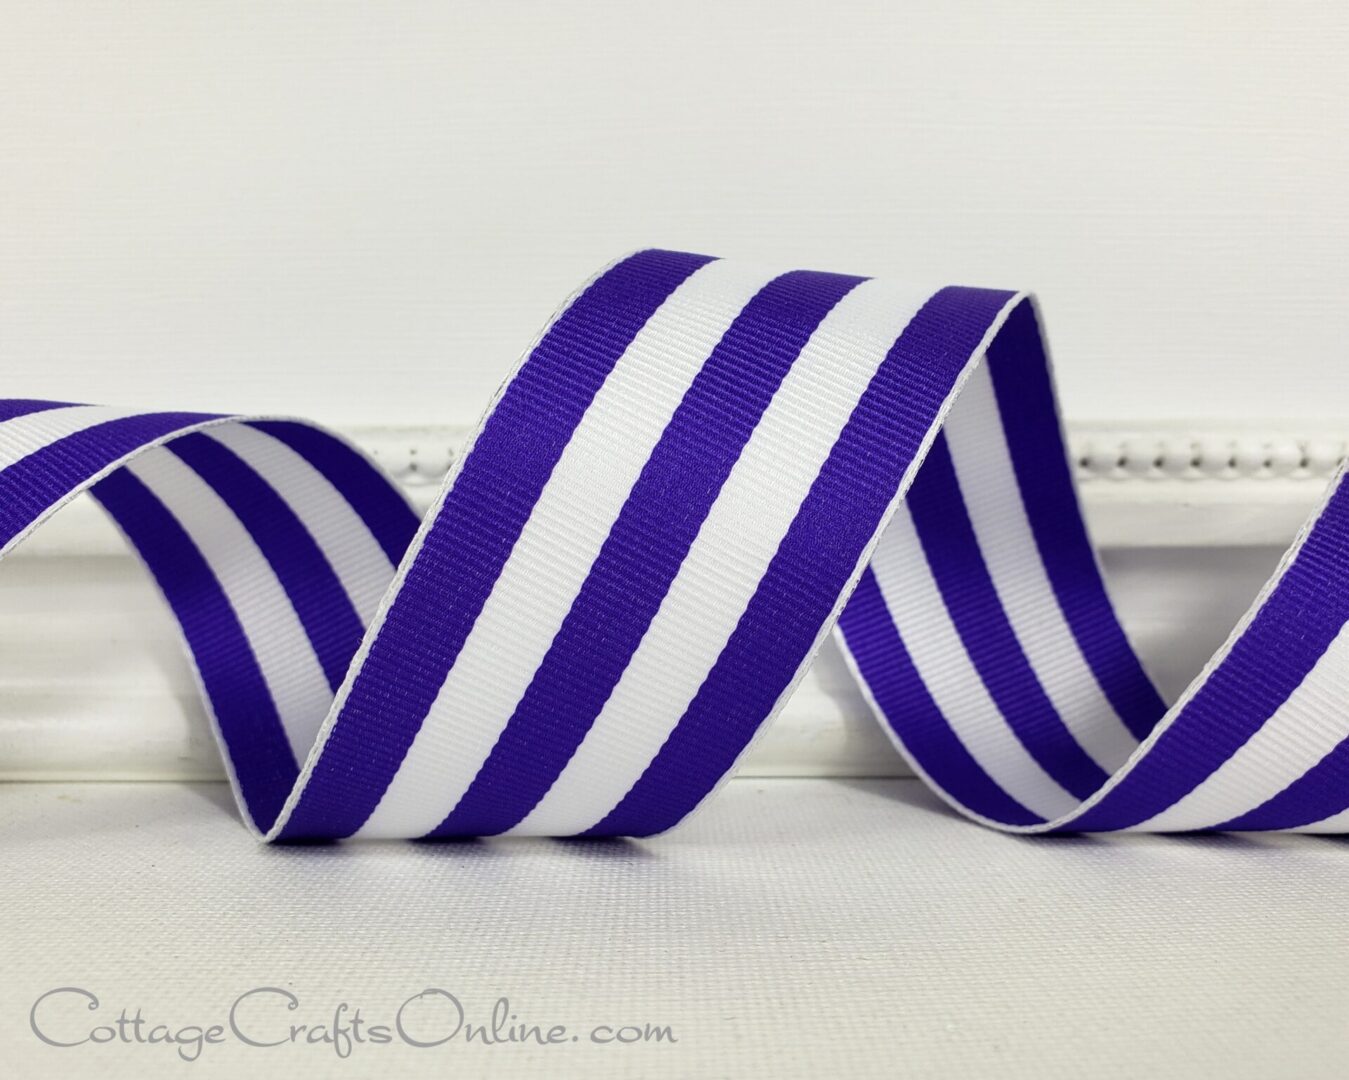 Carnival purple and white grosgrain 1.5" wide wired ribbon from the Etsy shop of Cottage Crafts Online.